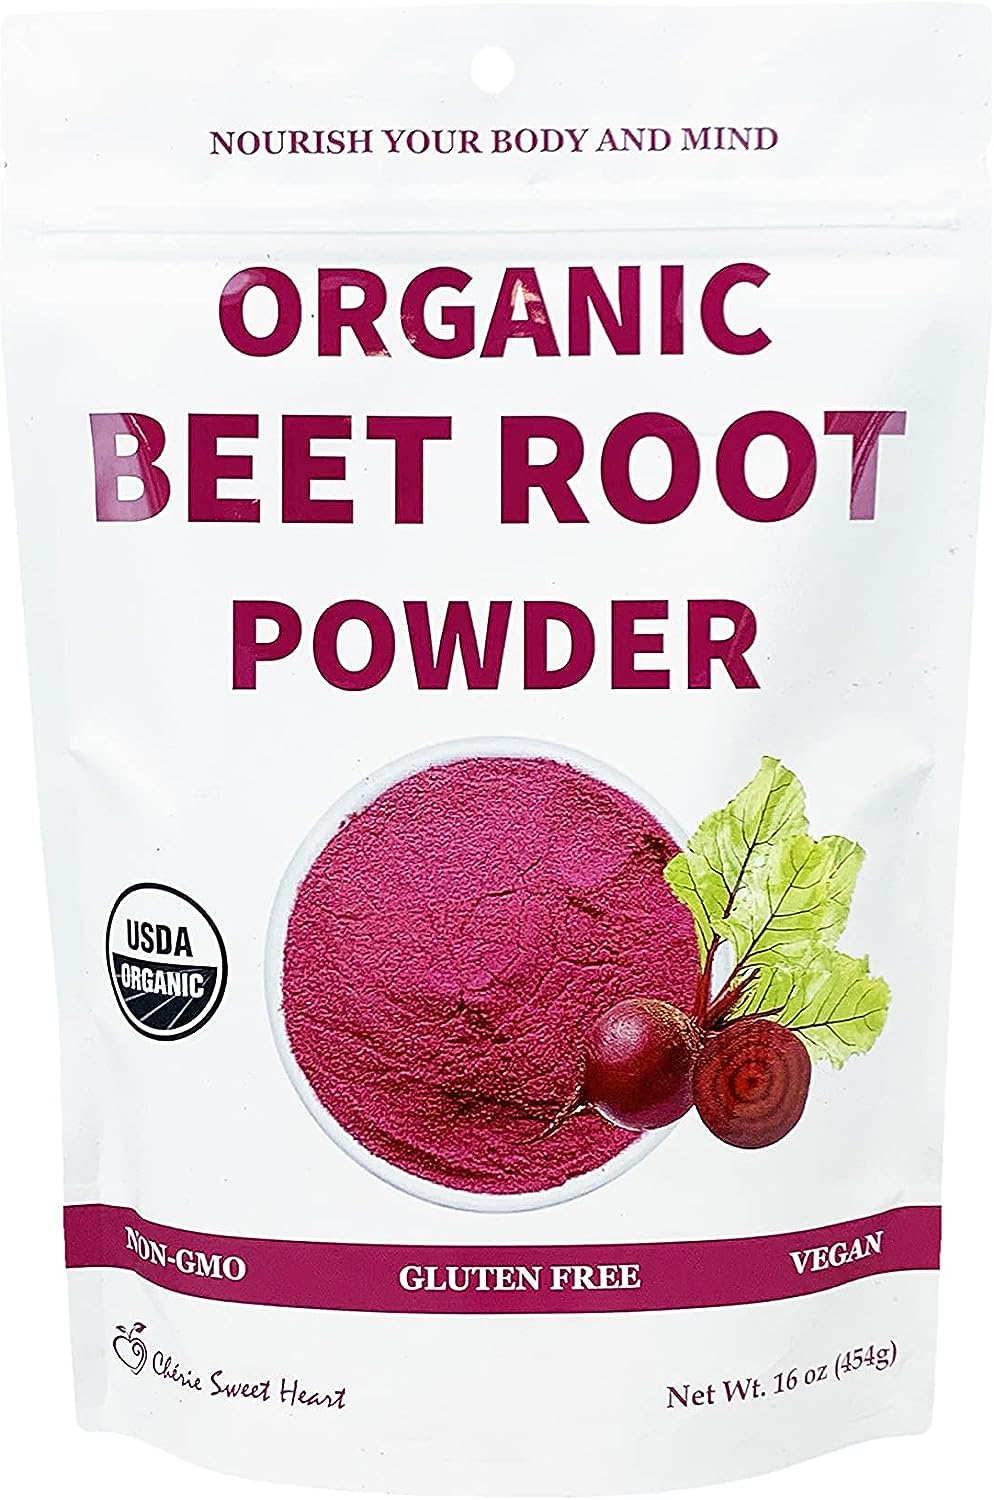 Wholesale prices with free shipping all over United States Organic Beet Root Powder (1 LB) by Chérie Sweet Heart, Raw & Non-GMO - Steven Deals